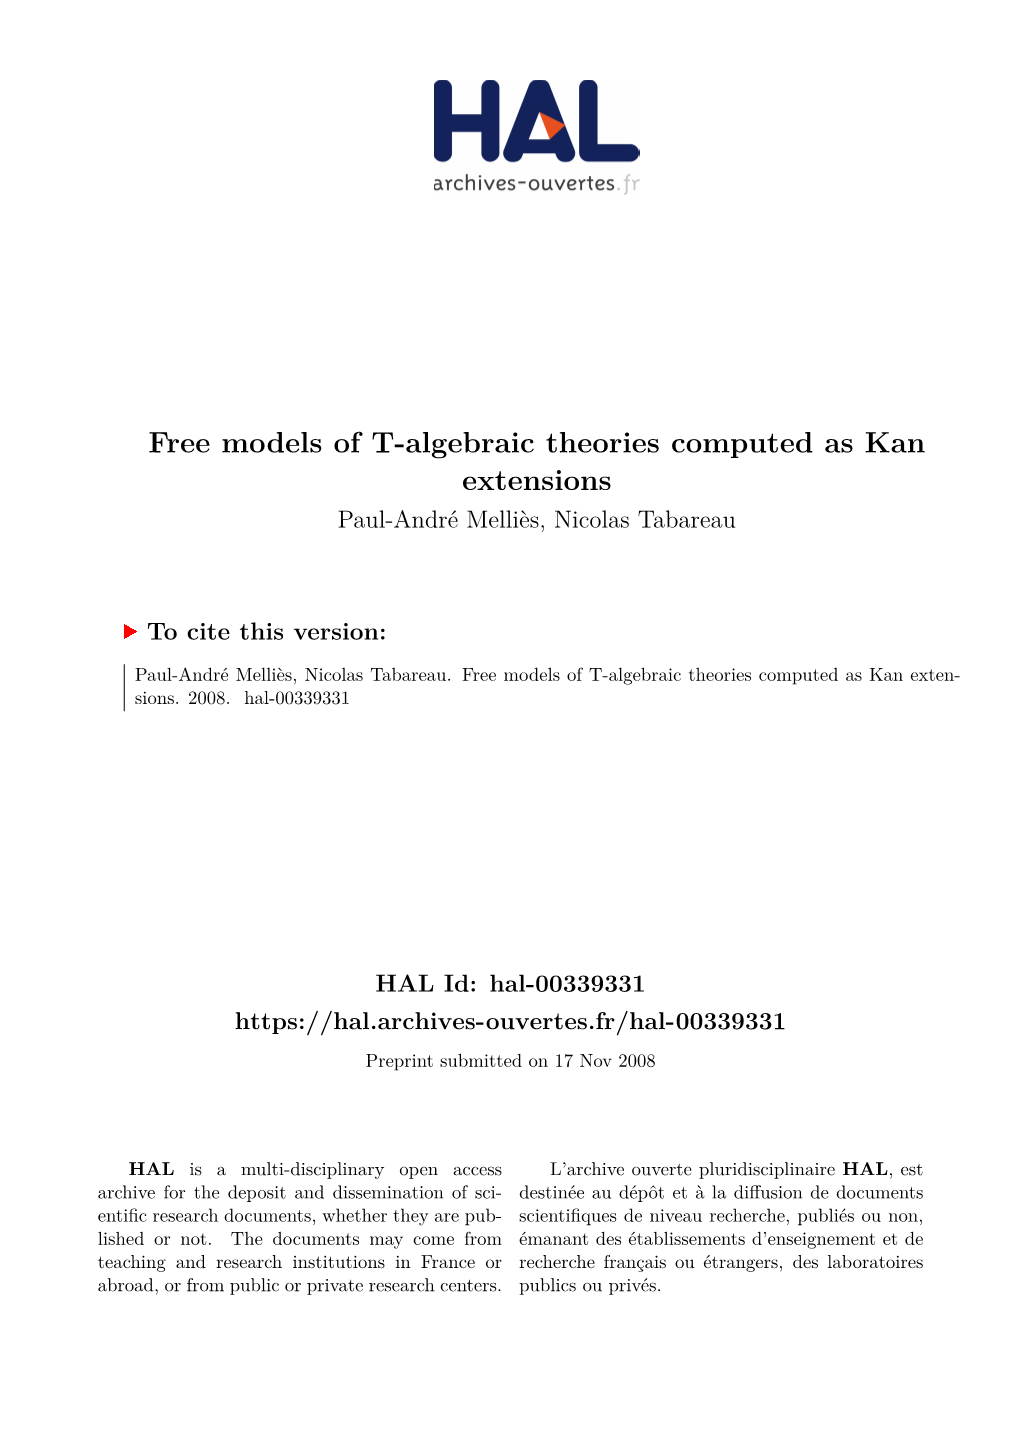 Free Models of T-Algebraic Theories Computed As Kan Extensions Paul-André Melliès, Nicolas Tabareau